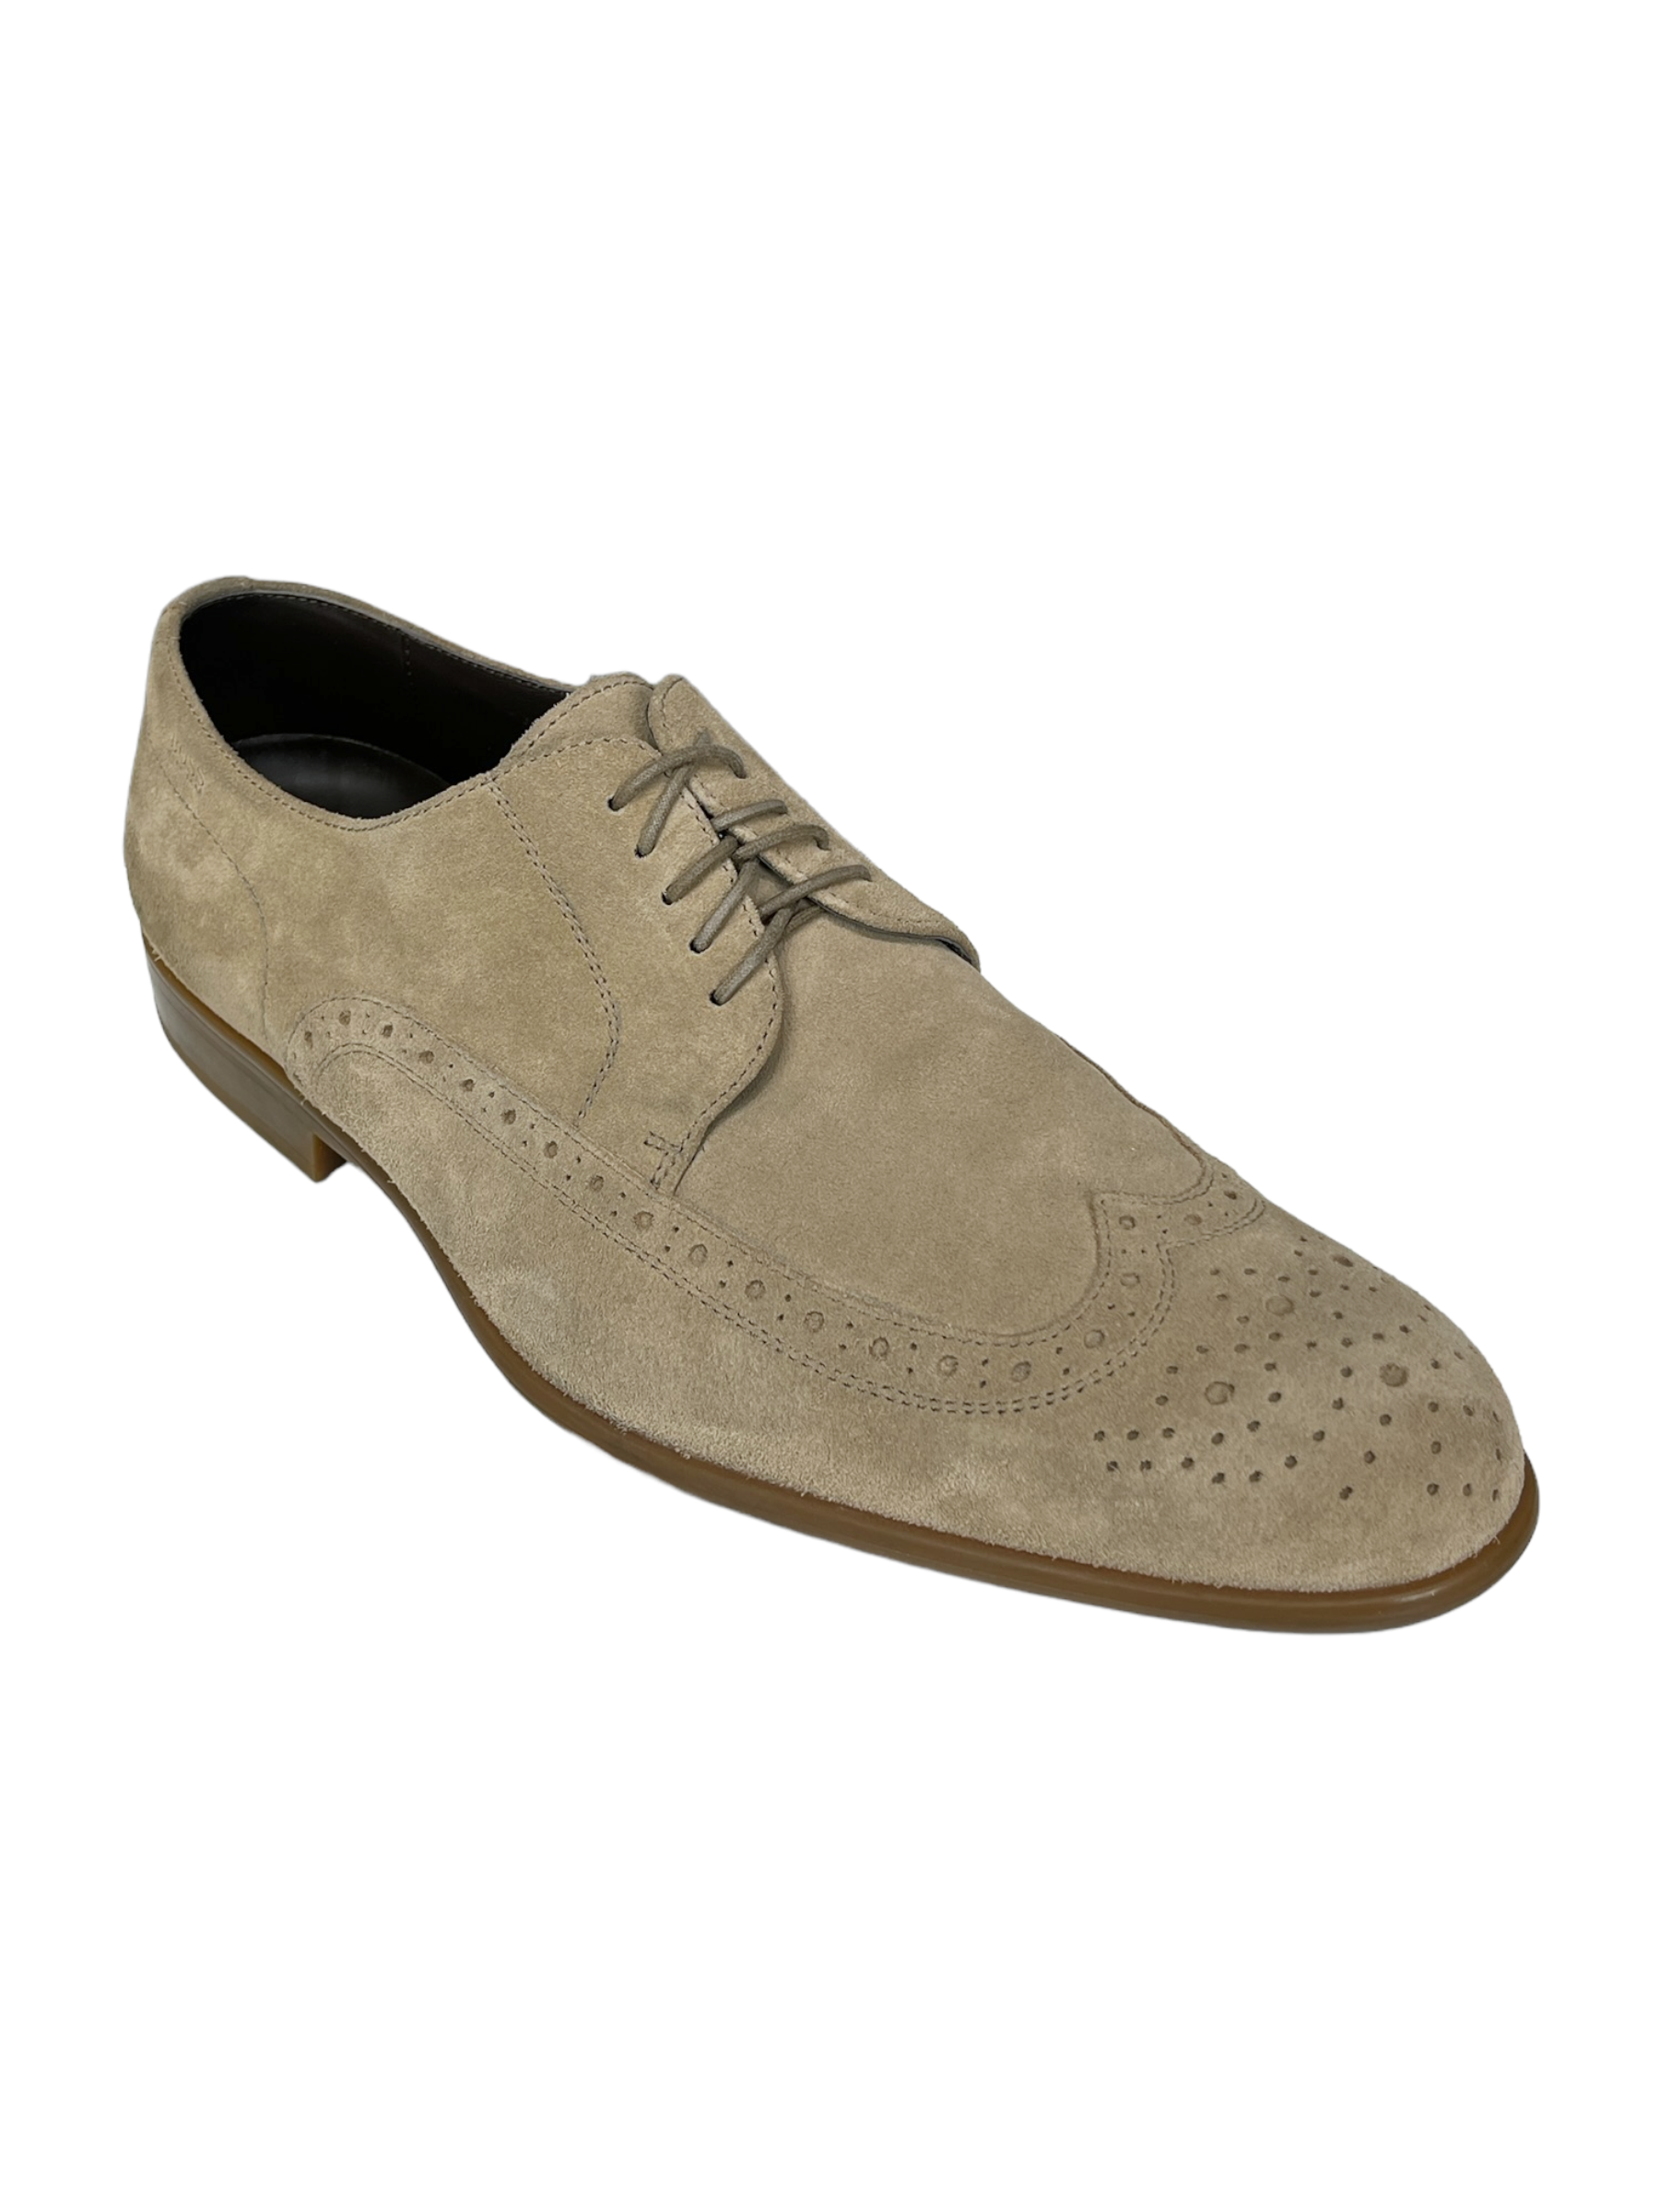 How To Wear It: Light Colored Suede Shoes